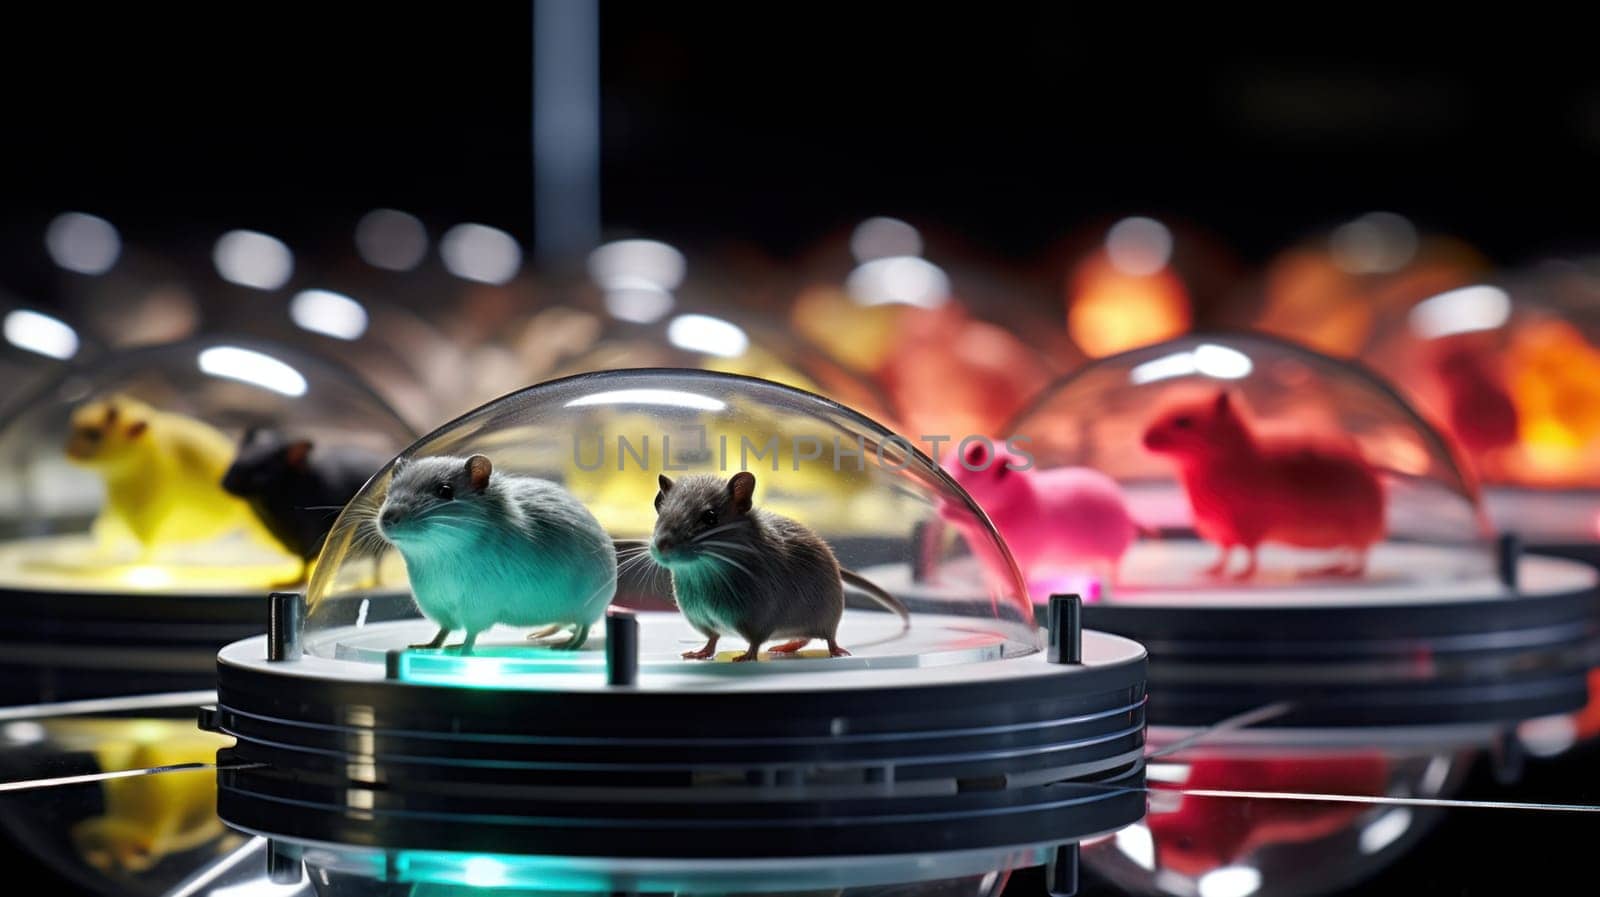 A group of small mice in glass domes on a table